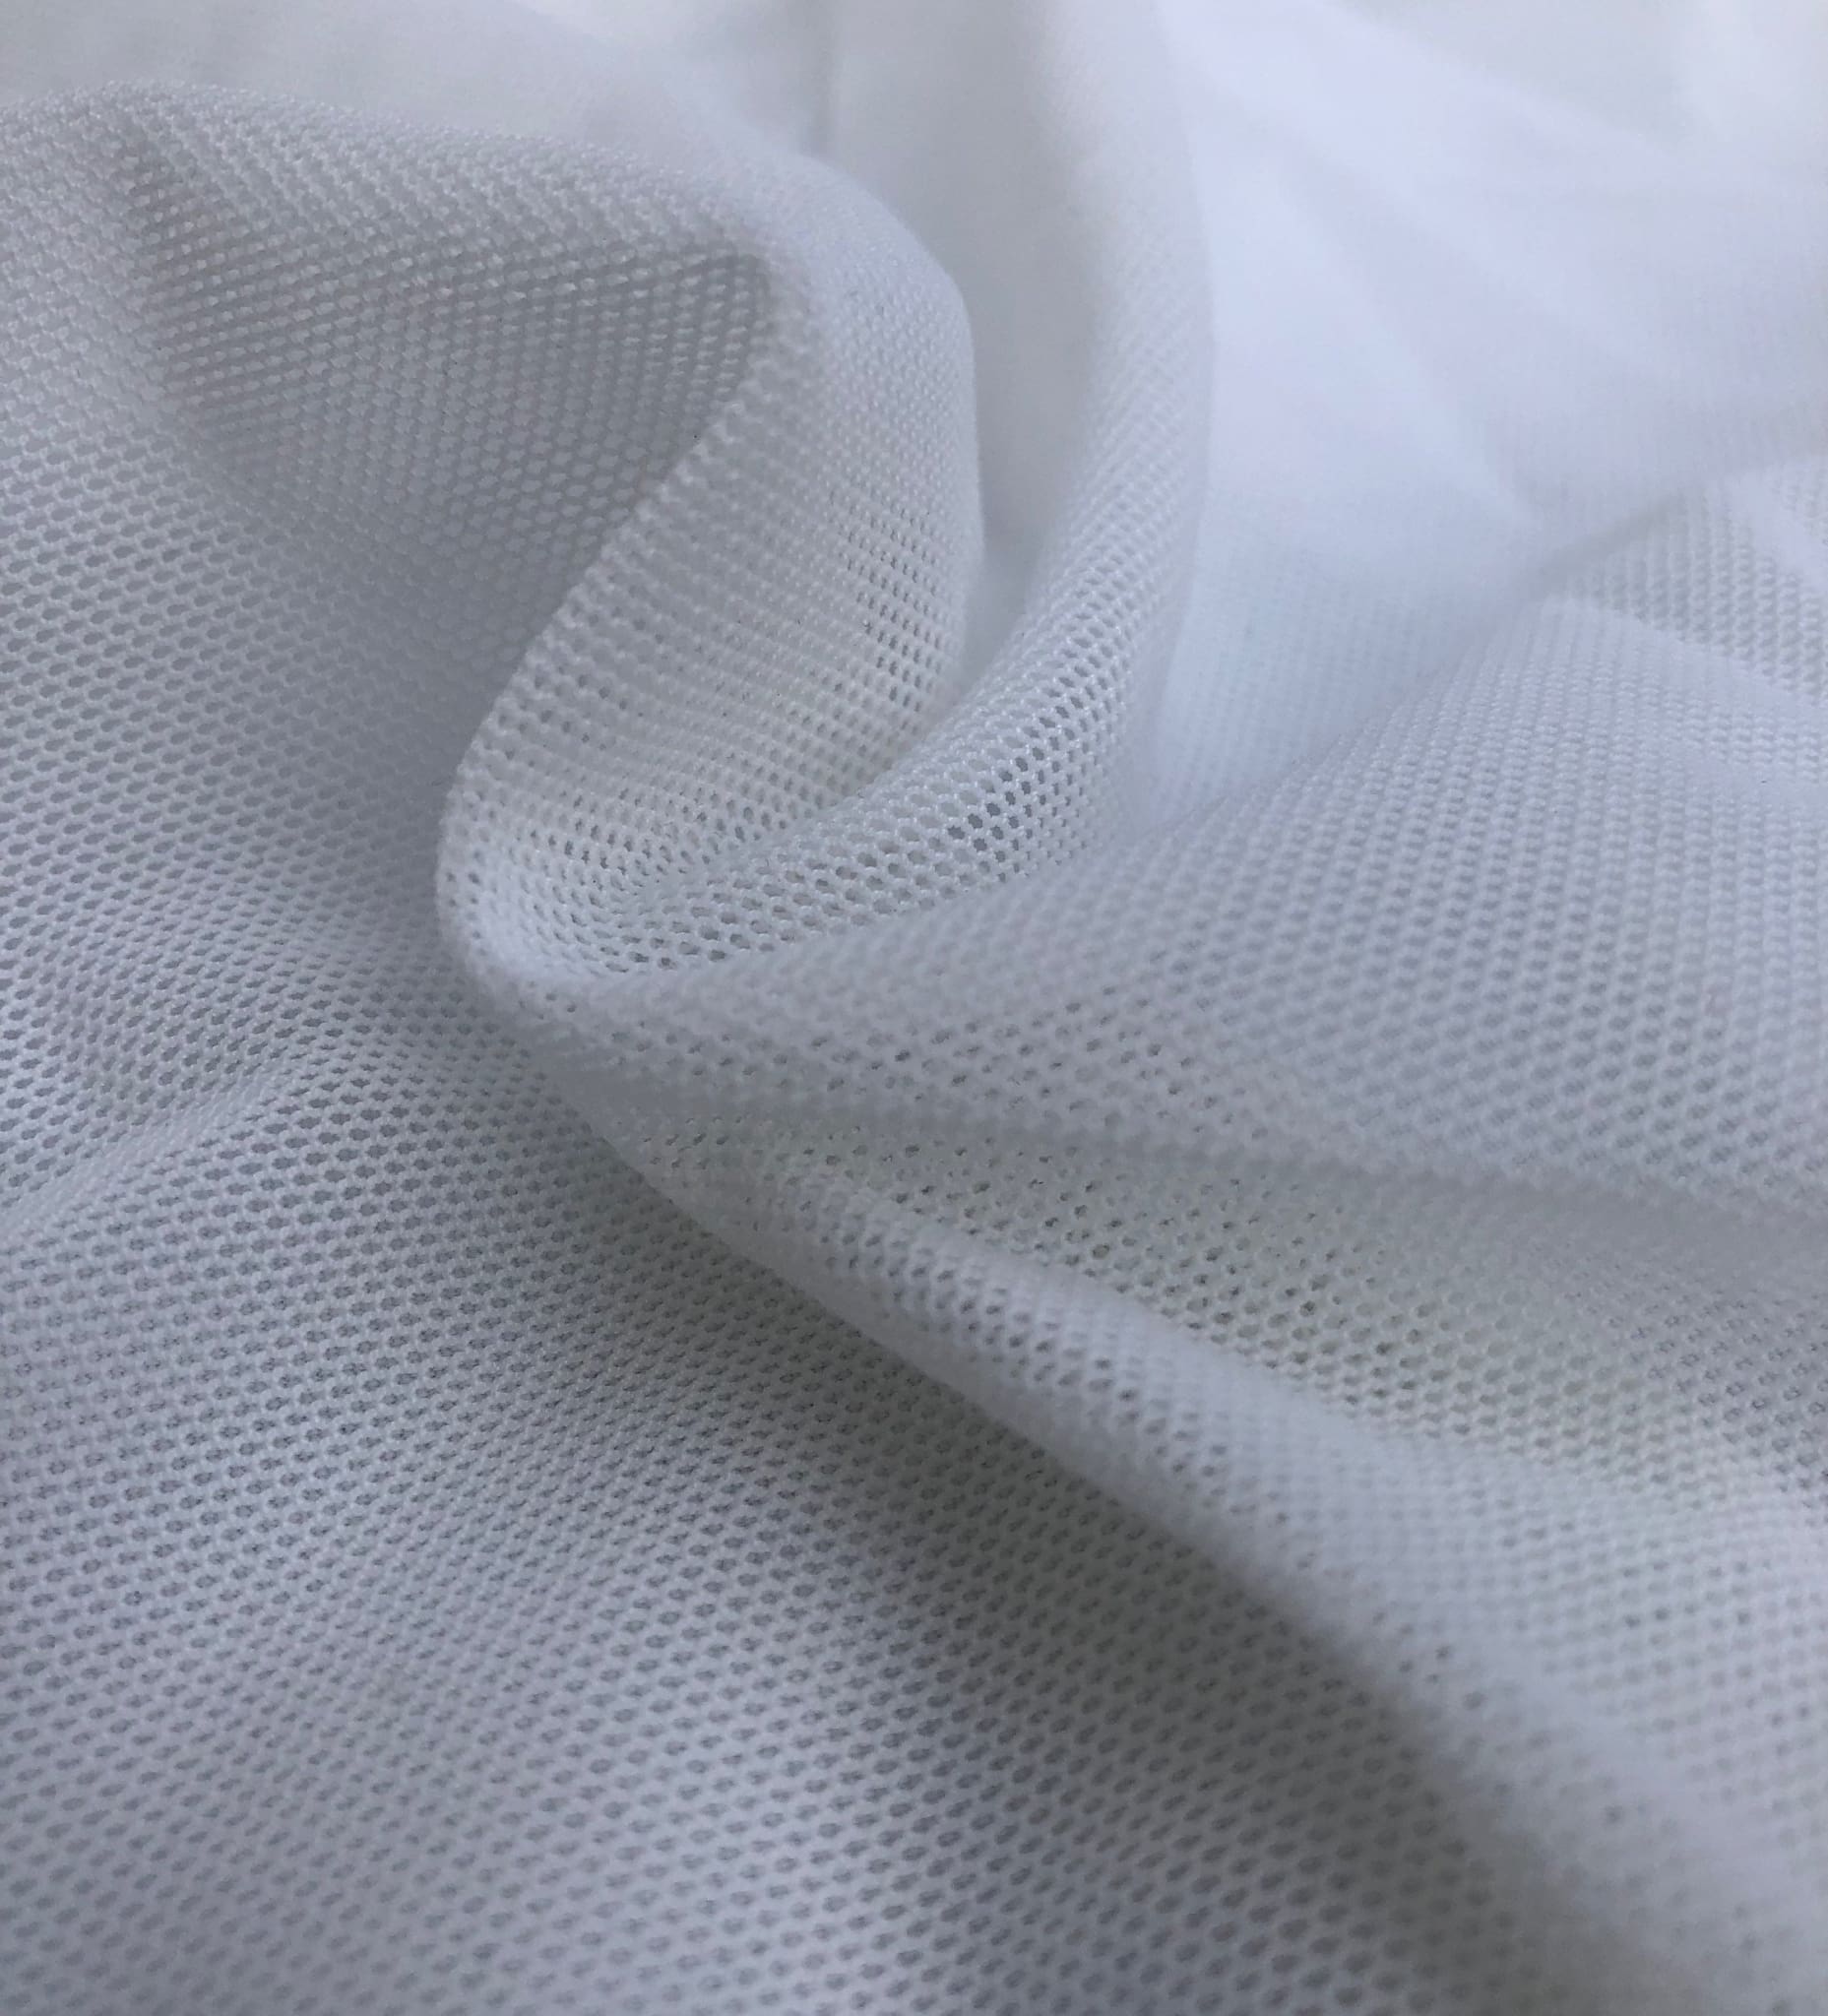 56 Optic White Nylon Spandex Blend Power Mesh Woven Fabric By the